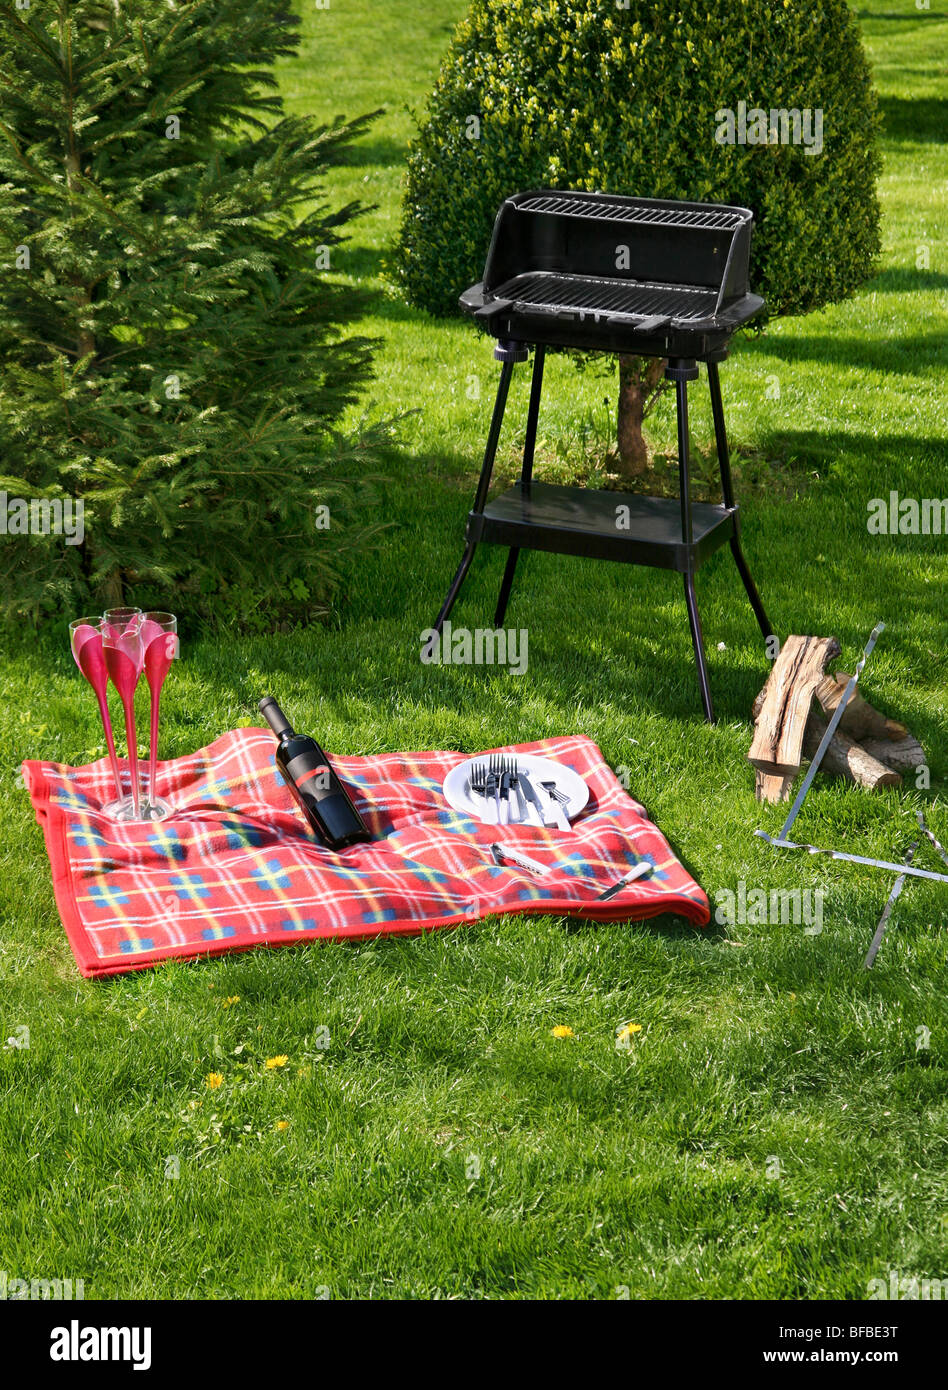 Preparing to picnic on green herb with barbecue Stock Photo